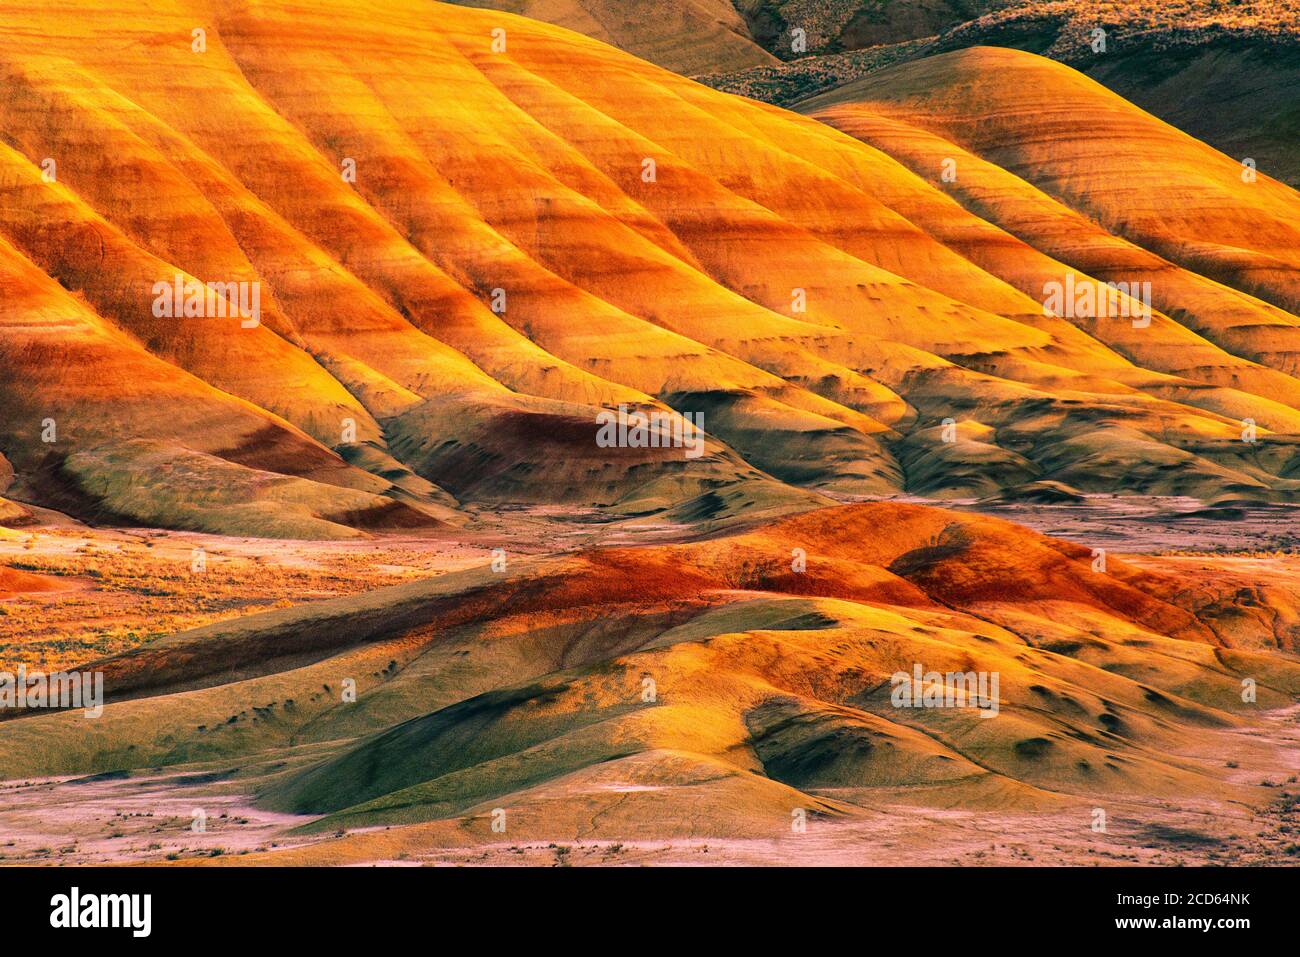 John Day Fossil Beds National Monument, Painted Hills Unit, Oregon, USA Foto Stock